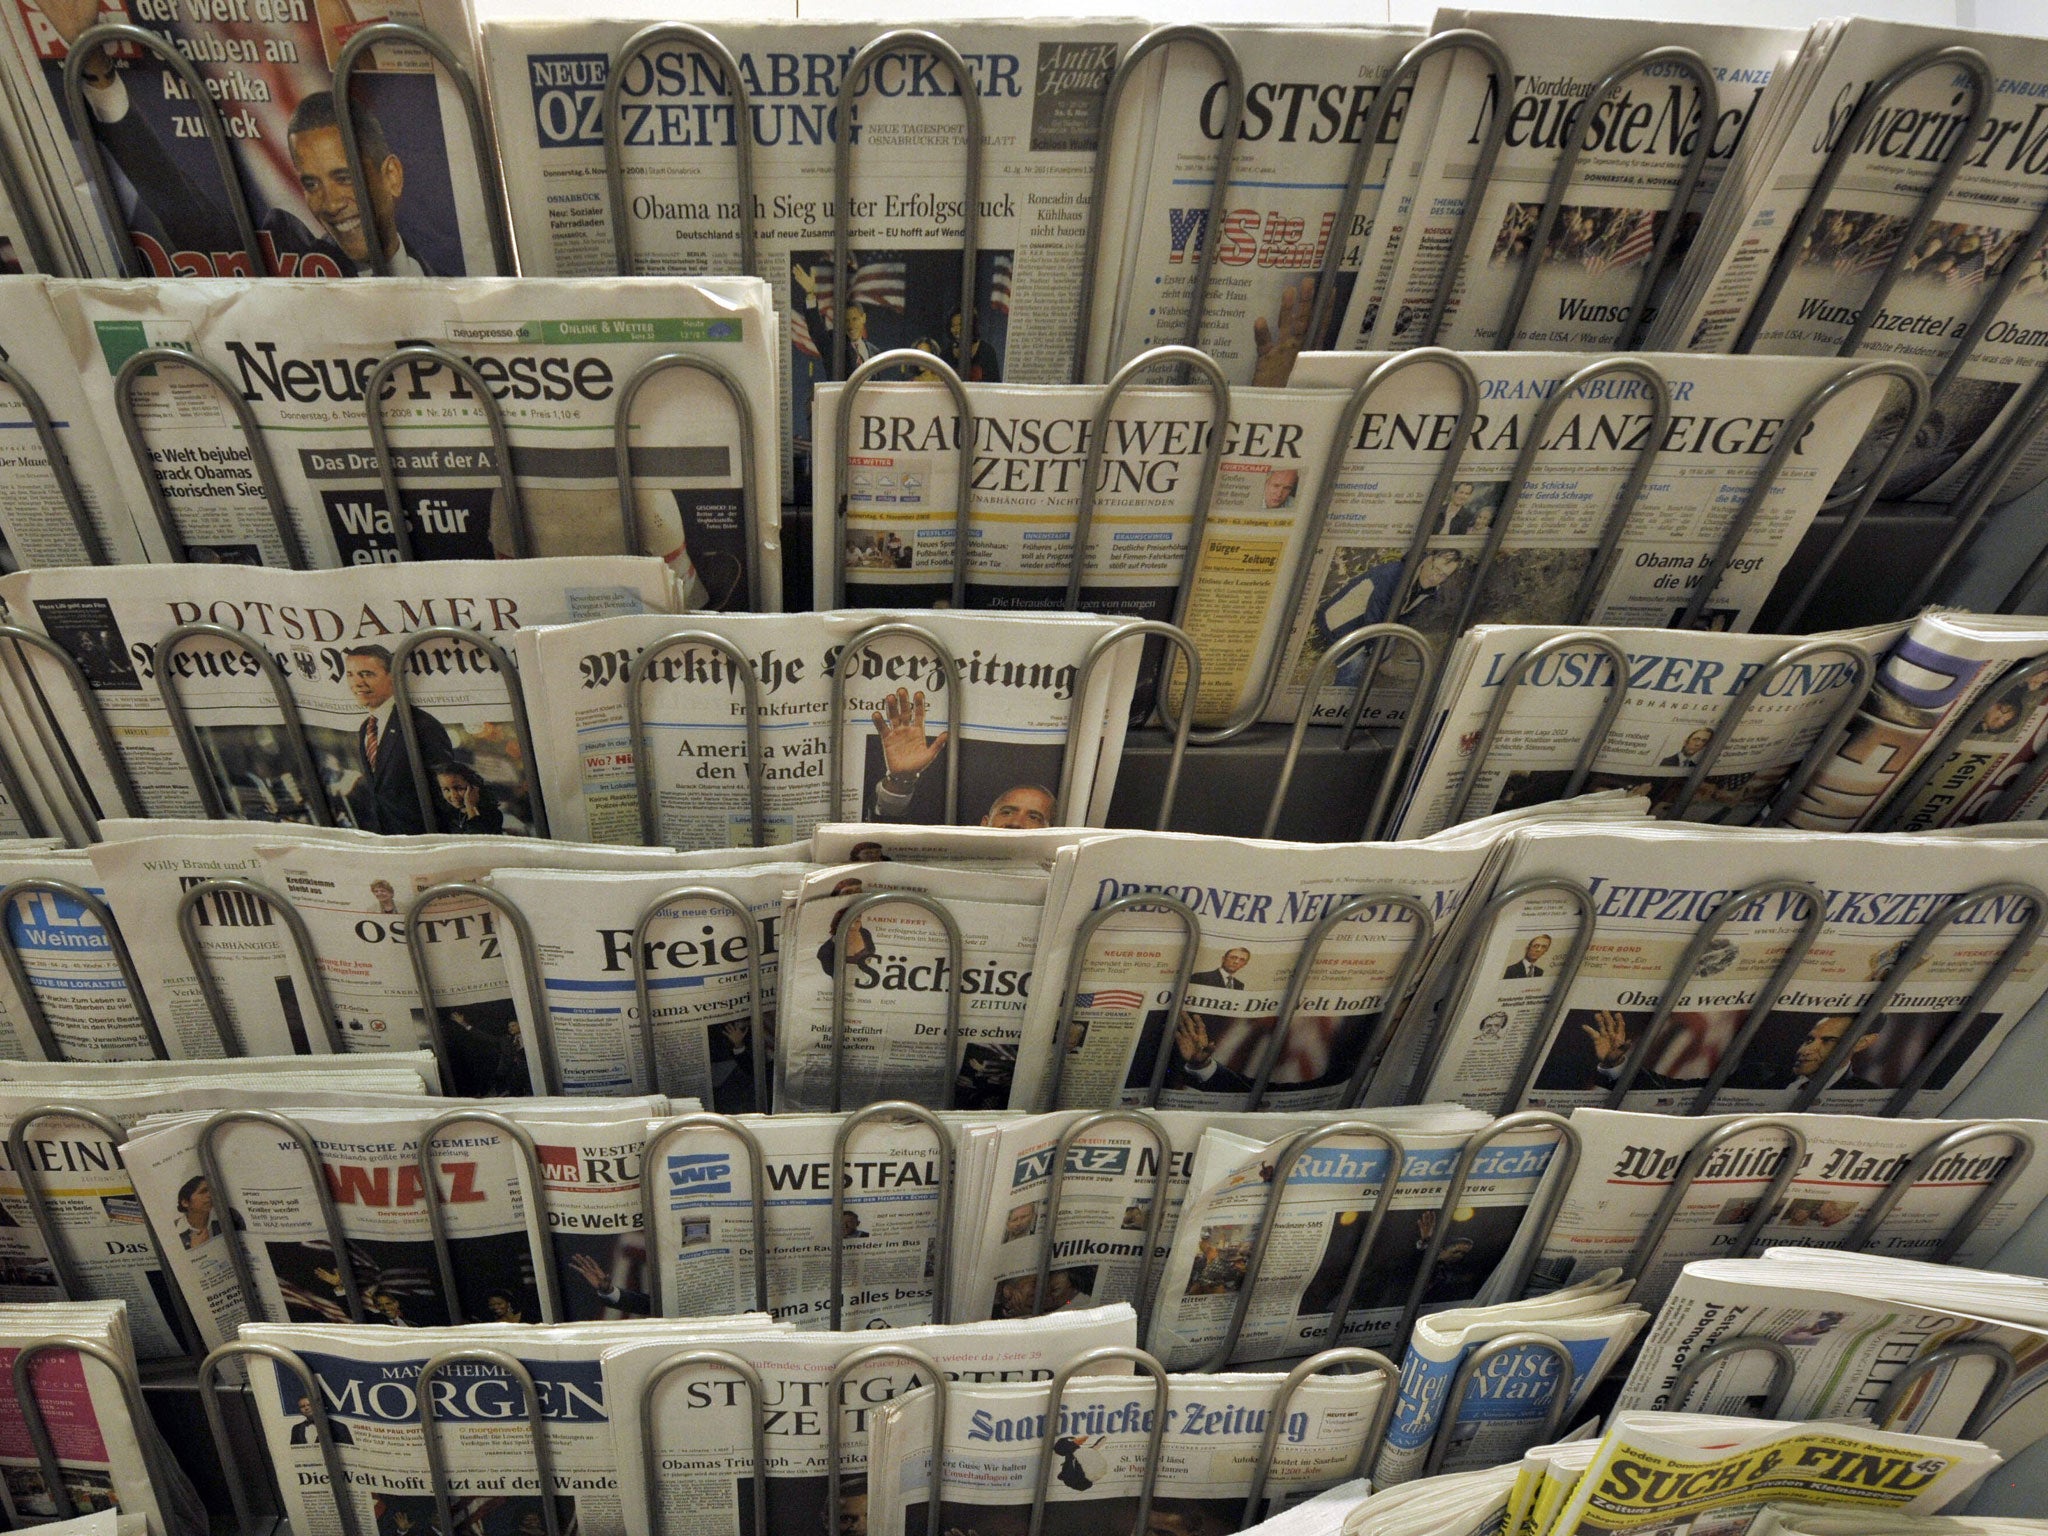 German newspapers, unrelated to the changes at The Oregonian, at a news stand in Berlin.